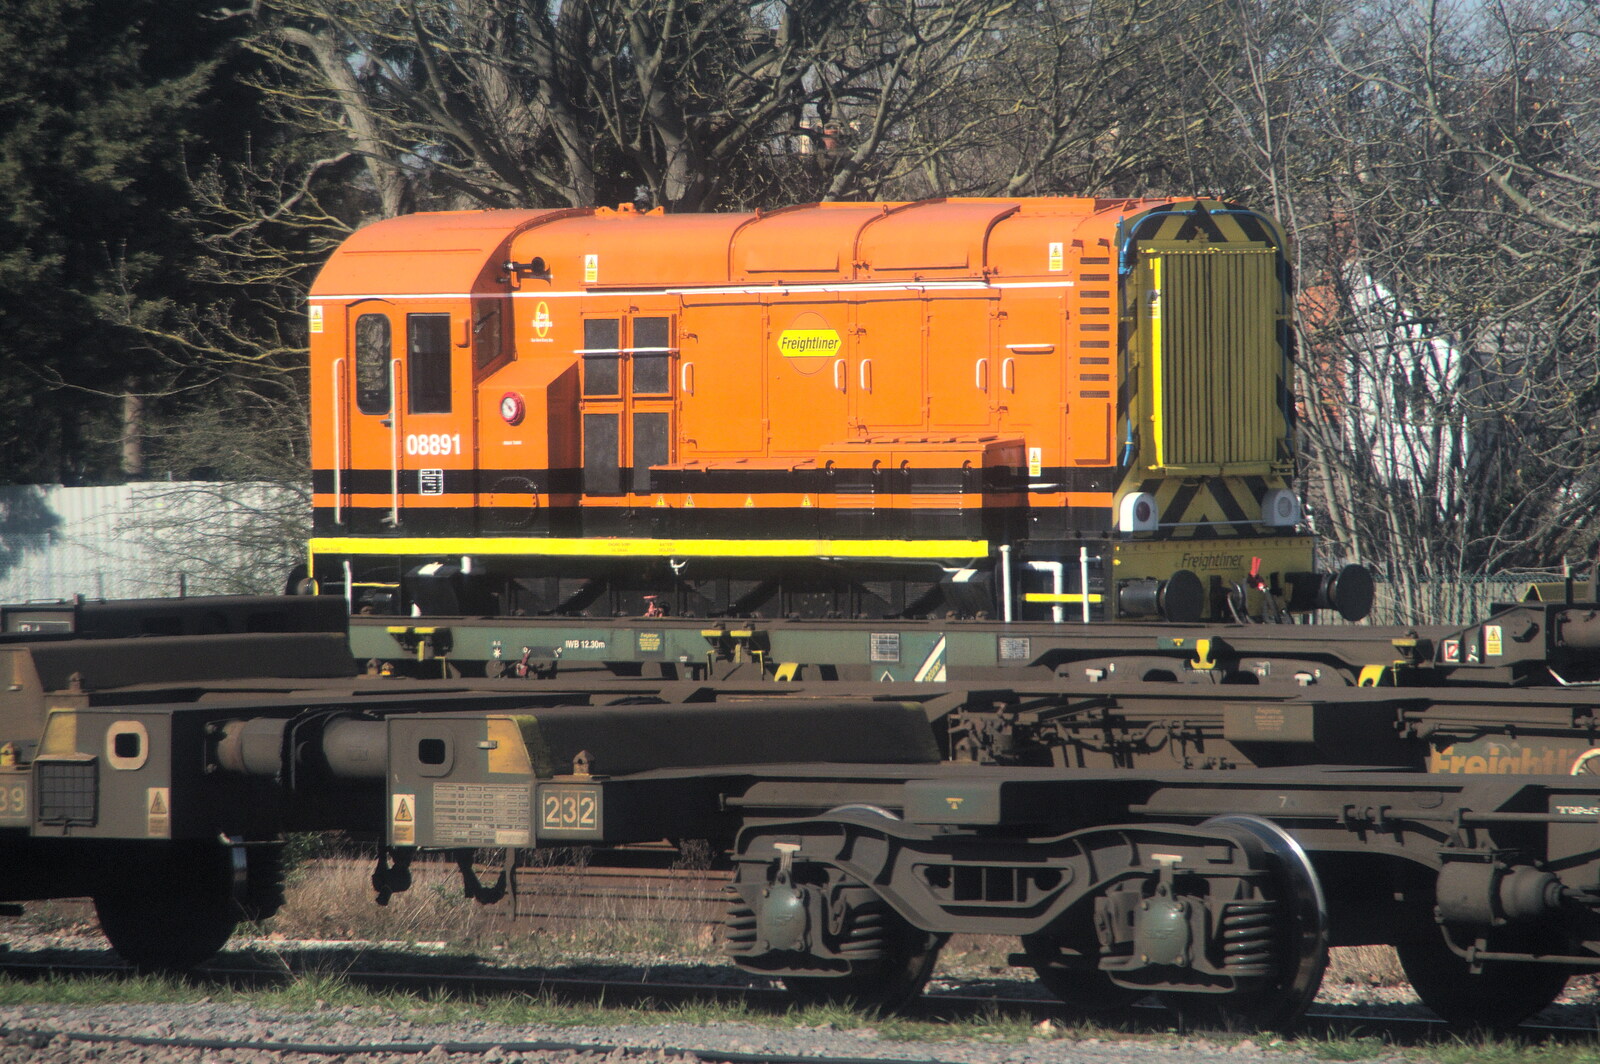 08891, apparently famous enough for its own model from A Day in New Milton, Hampshire - 3rd April 2023